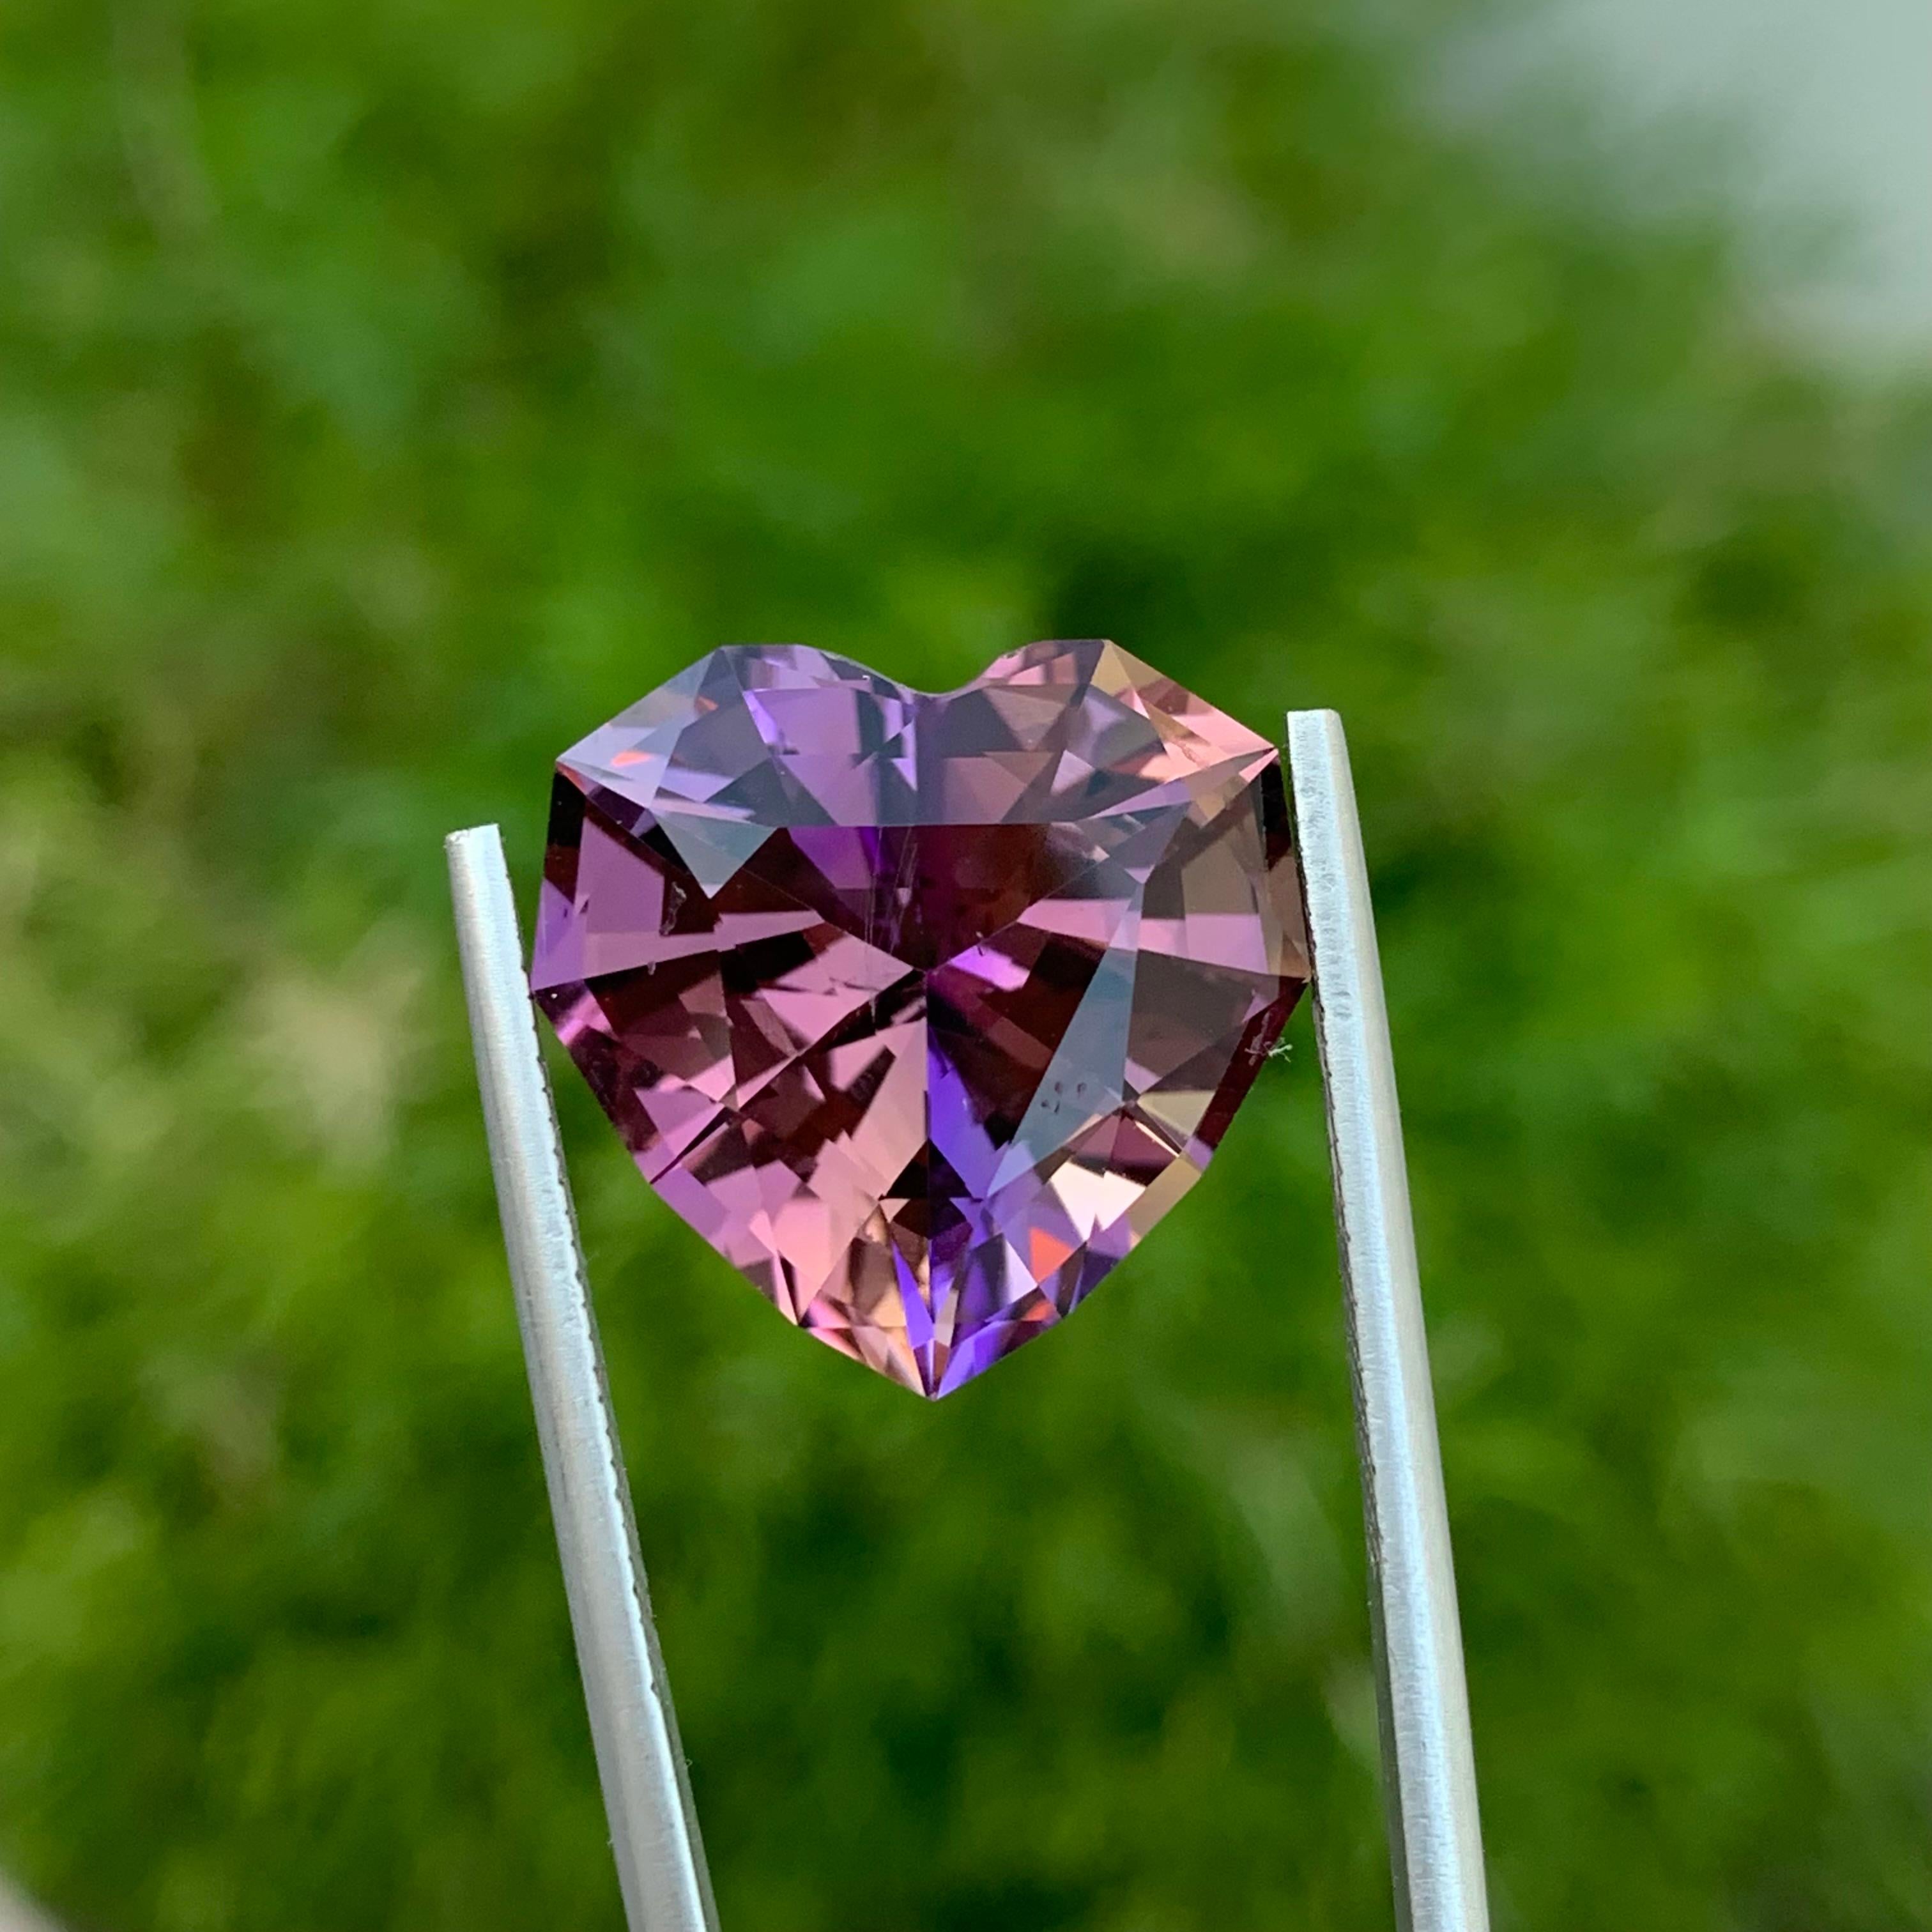 Faceted Ametrine
Weight: 17.70 Carats
Dimension; 17.8 x 18.4 x 11.2 Mm
Origin: Brazil
Color: Purple & Yellow
Shape: Heart 
Treatment: Non
Certficate: On Demand
.
Ametrine is a unique and captivating gemstone that displays a harmonious blend of two